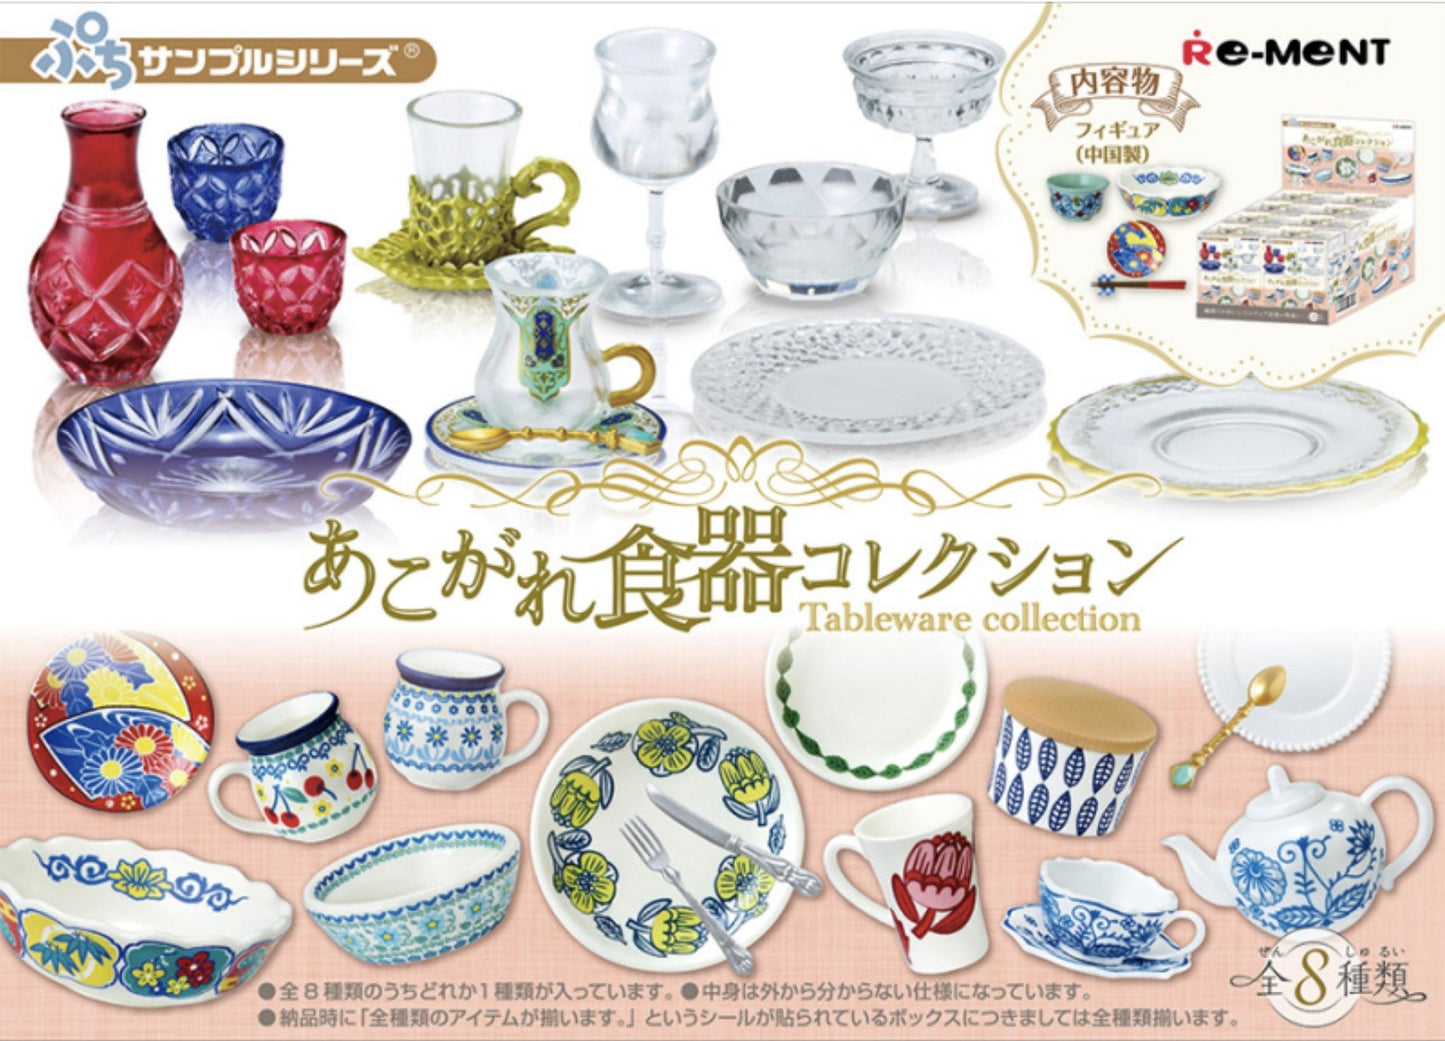 Re-ment Petit Sample Series Miniature Tableware Collection -  No.2